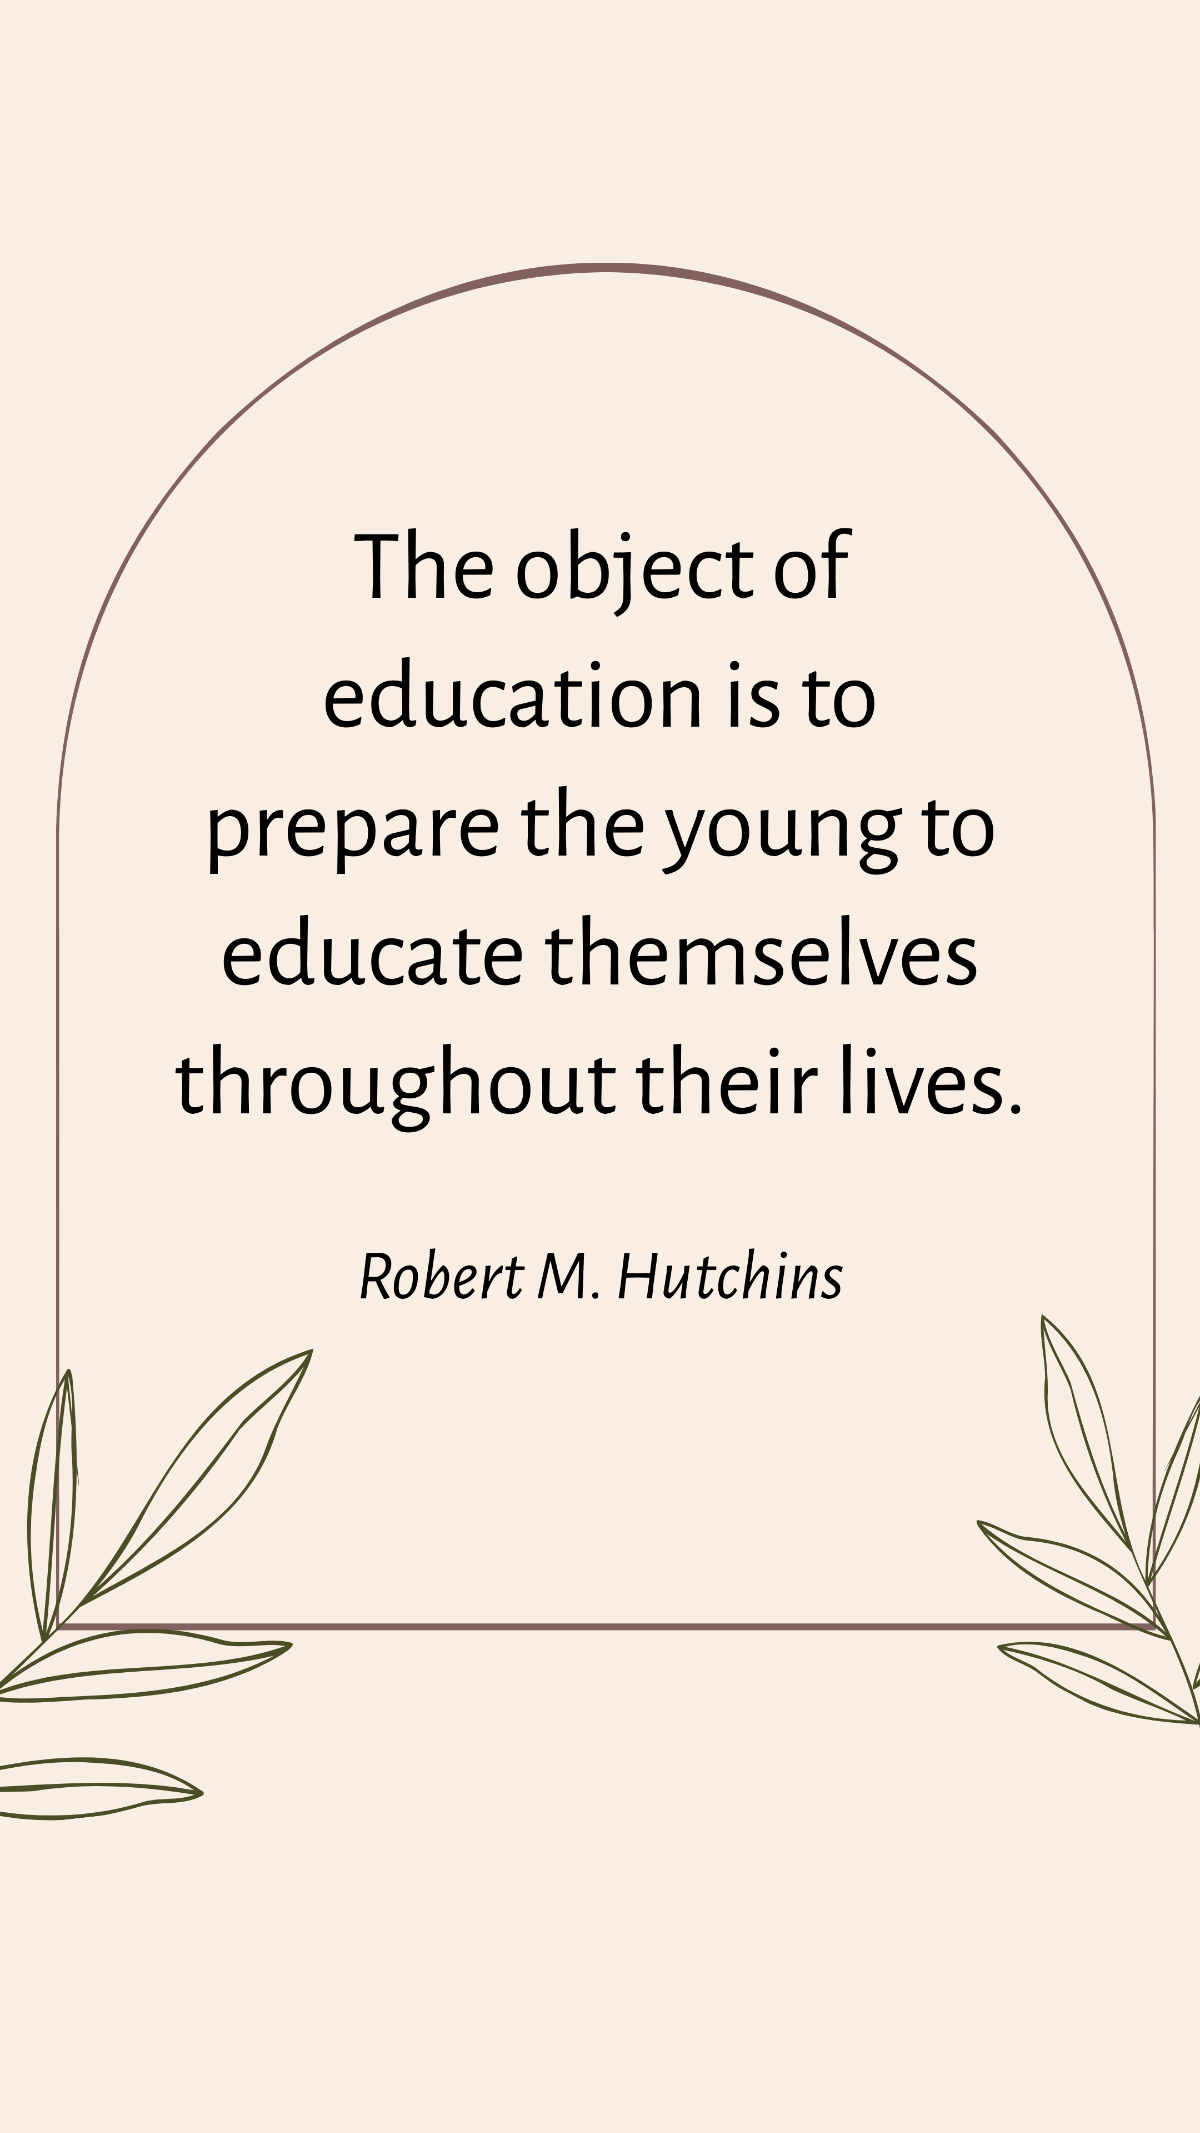 Free Robert M. Hutchins - The object of education is to prepare the young to educate themselves throughout their lives. Template